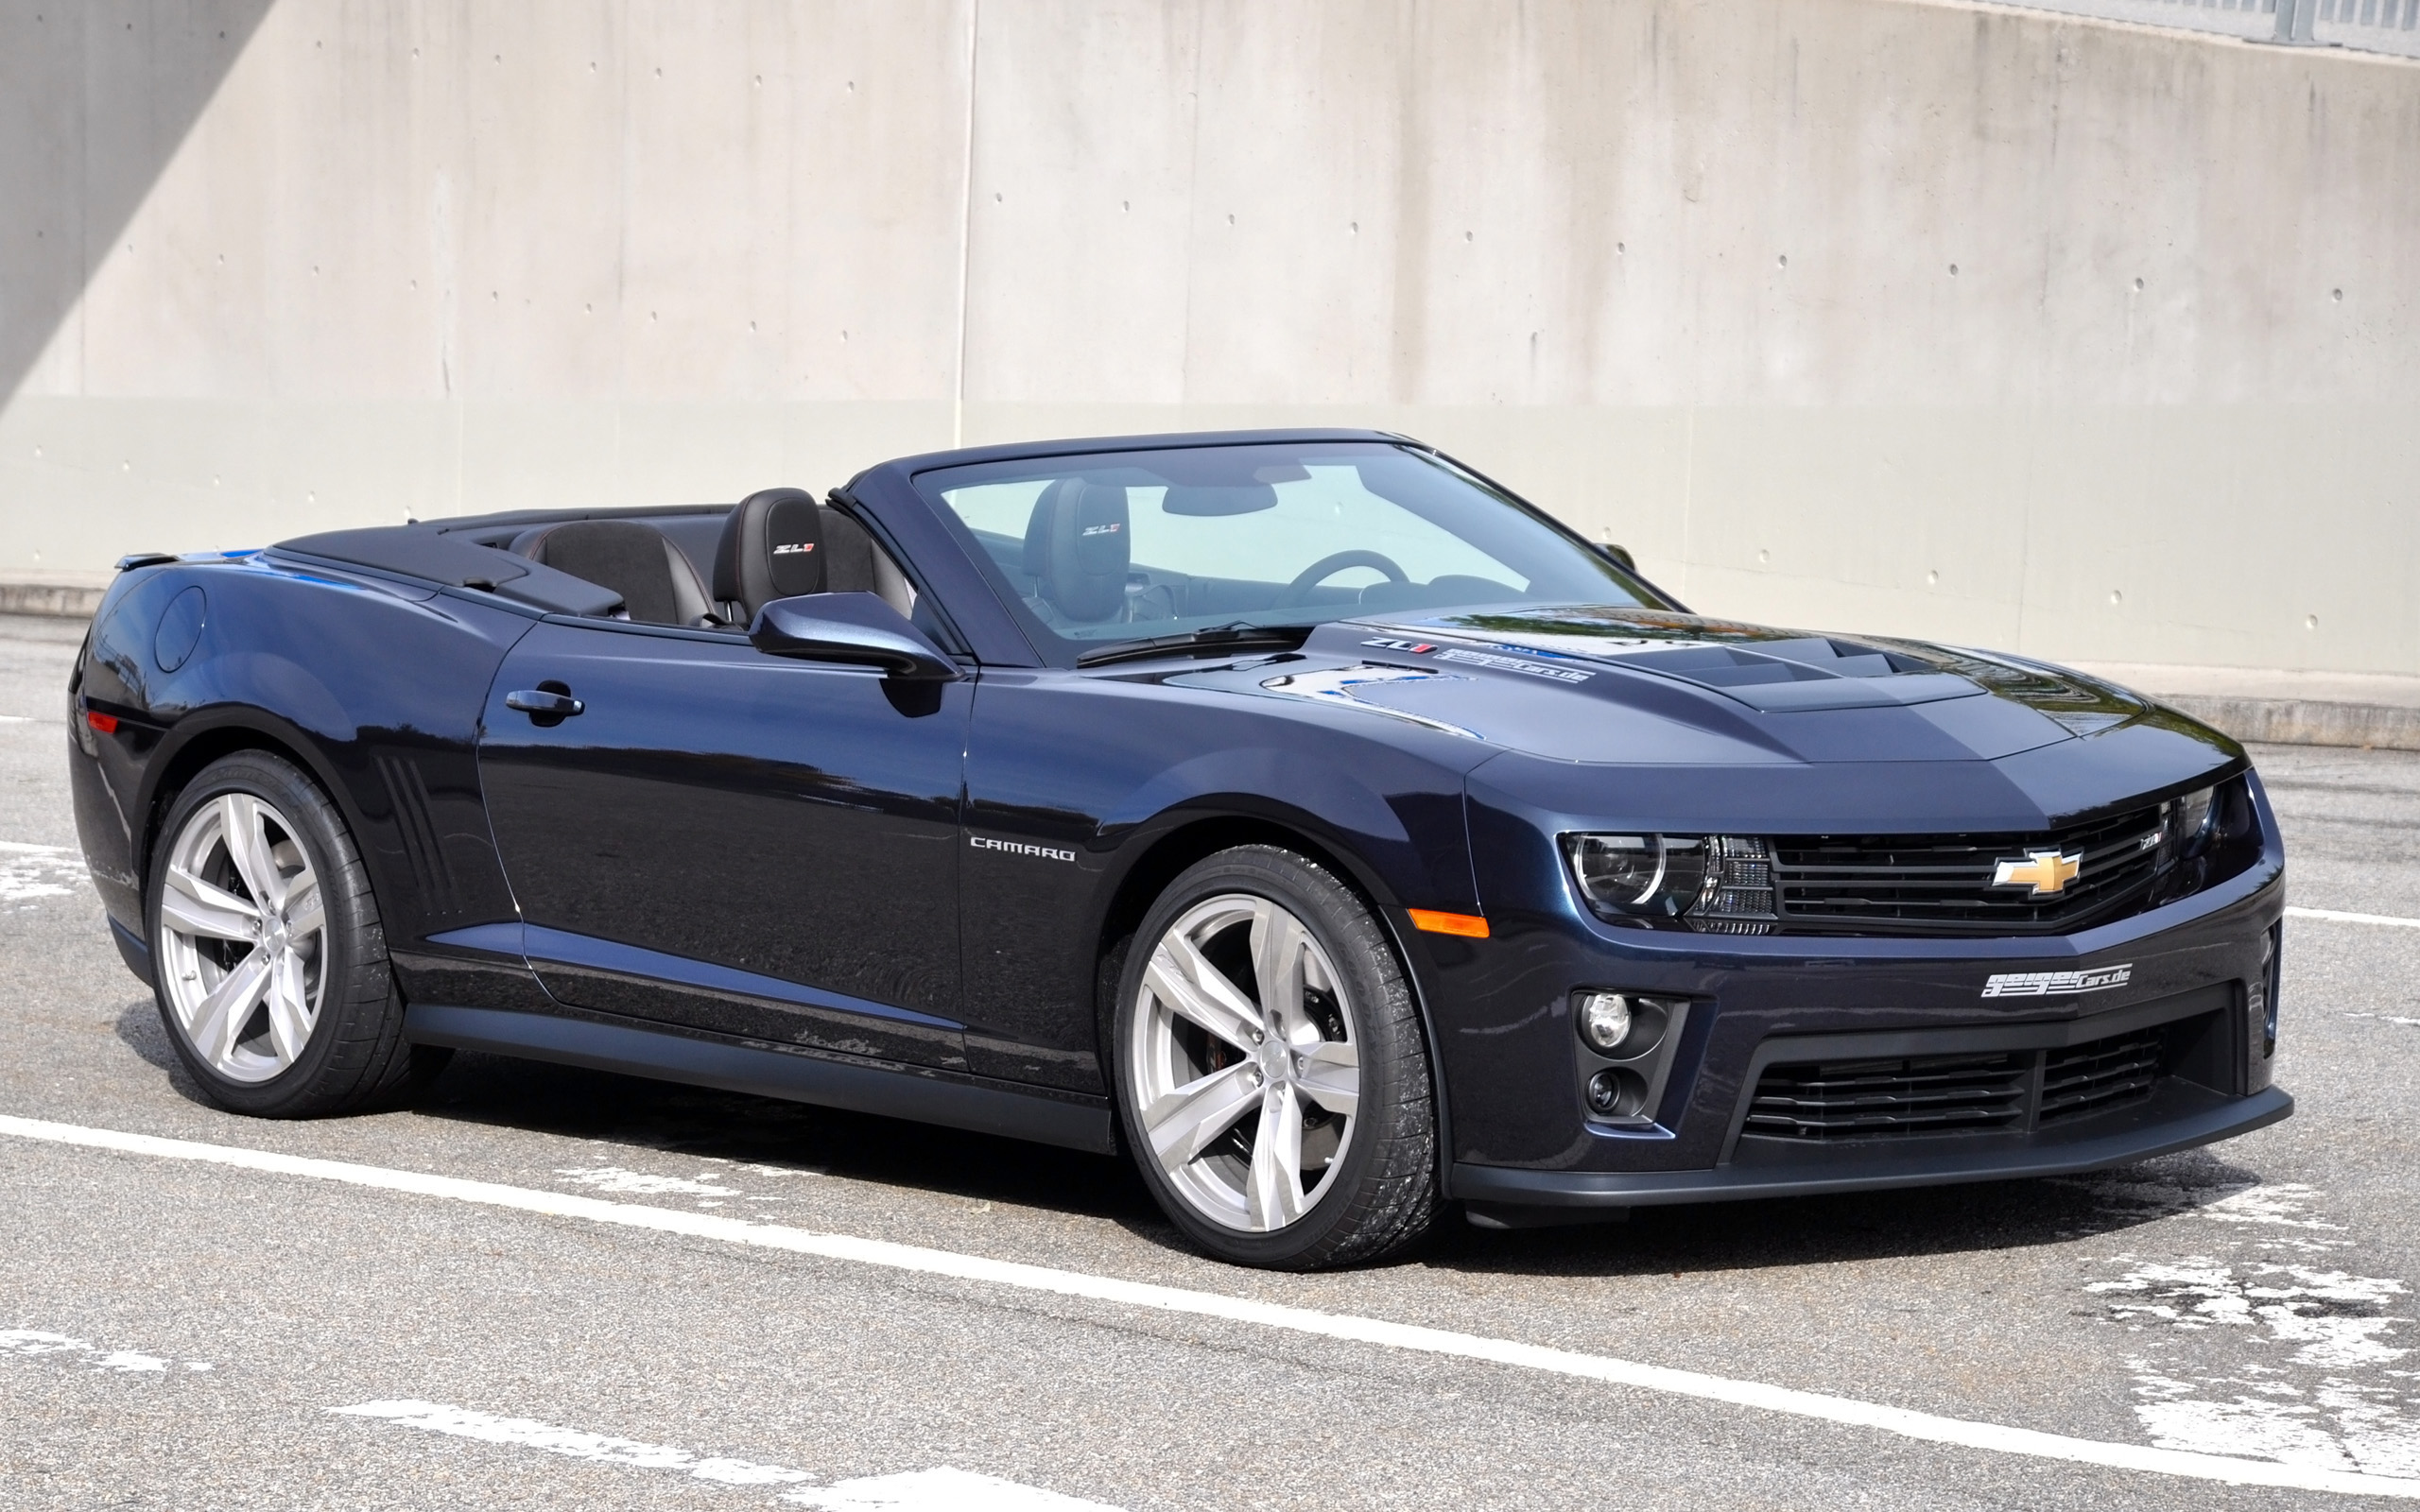 13 Geigercars Chevrolet Camaro Zl1 Cabrio Convertible Muscle Wallpapers Hd Desktop And Mobile Backgrounds